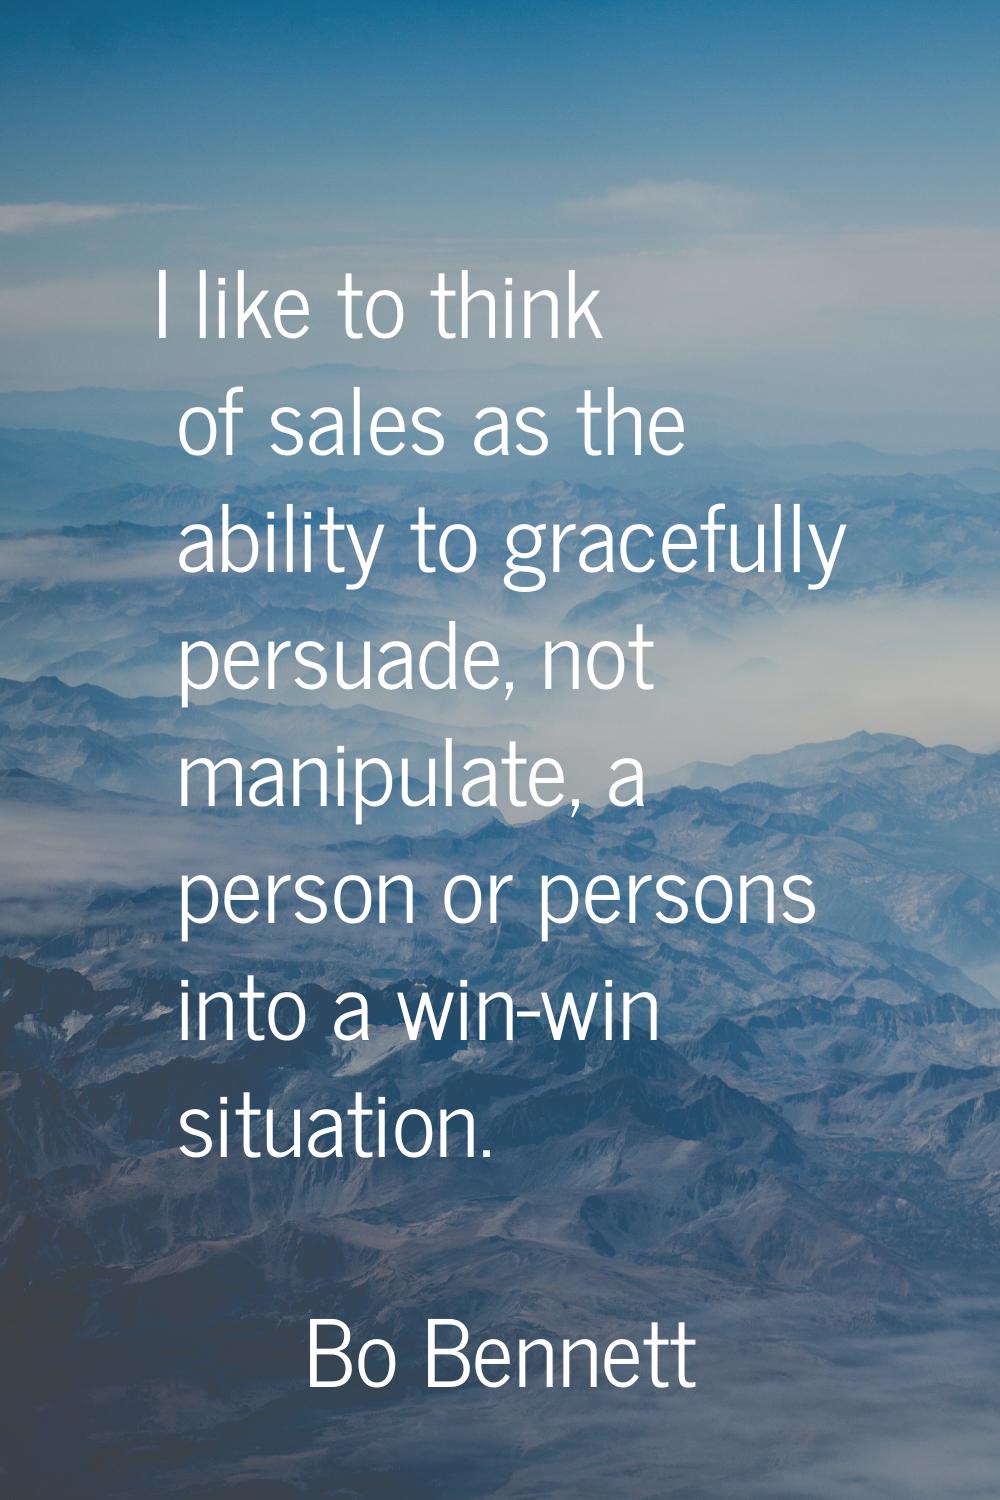 I like to think of sales as the ability to gracefully persuade, not manipulate, a person or persons